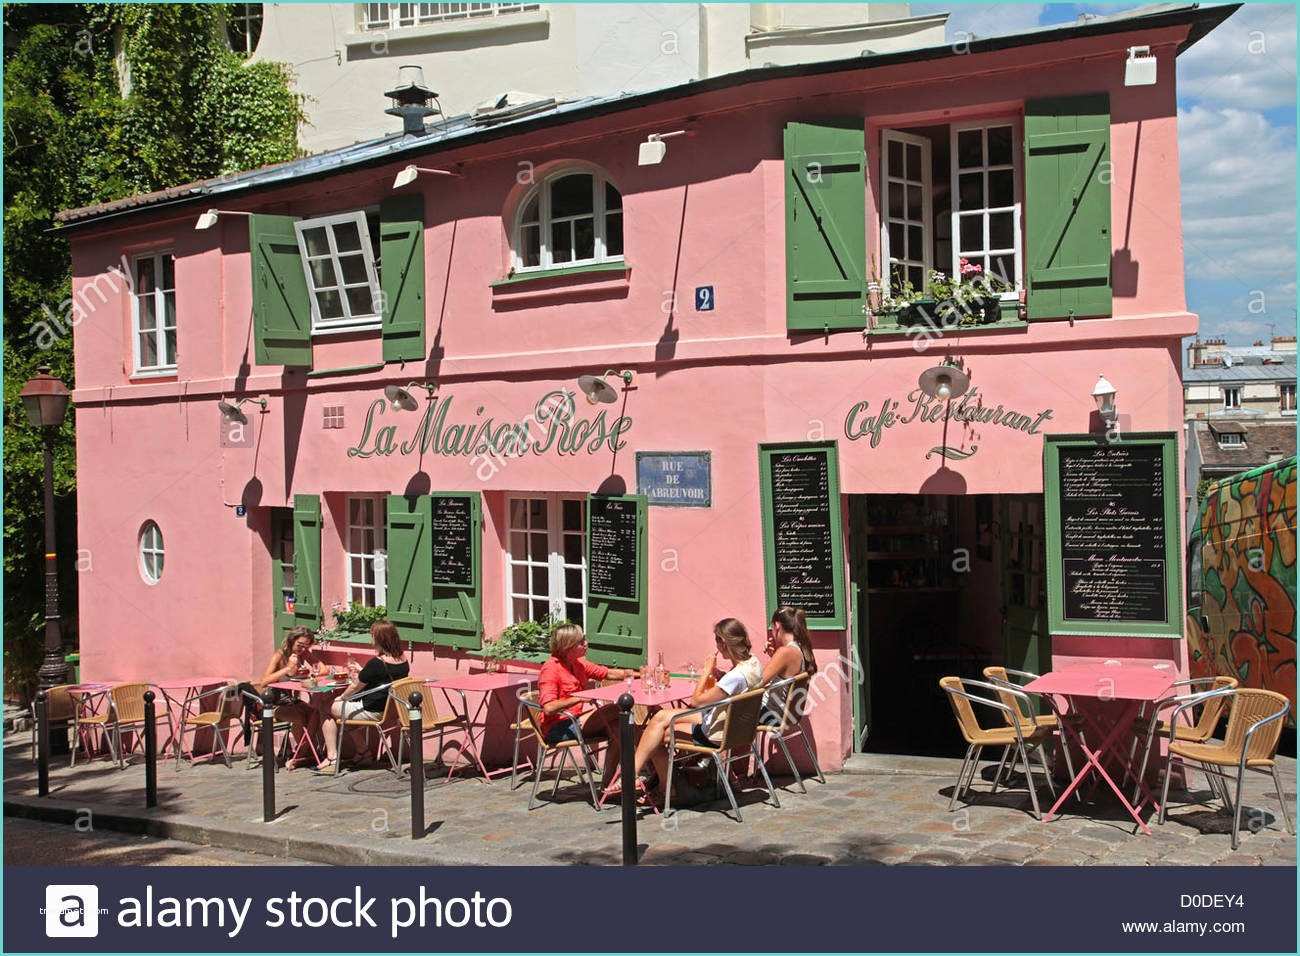 Maison Stock Images the Terrace Of the Maison Rose Cafe Restaurant On the